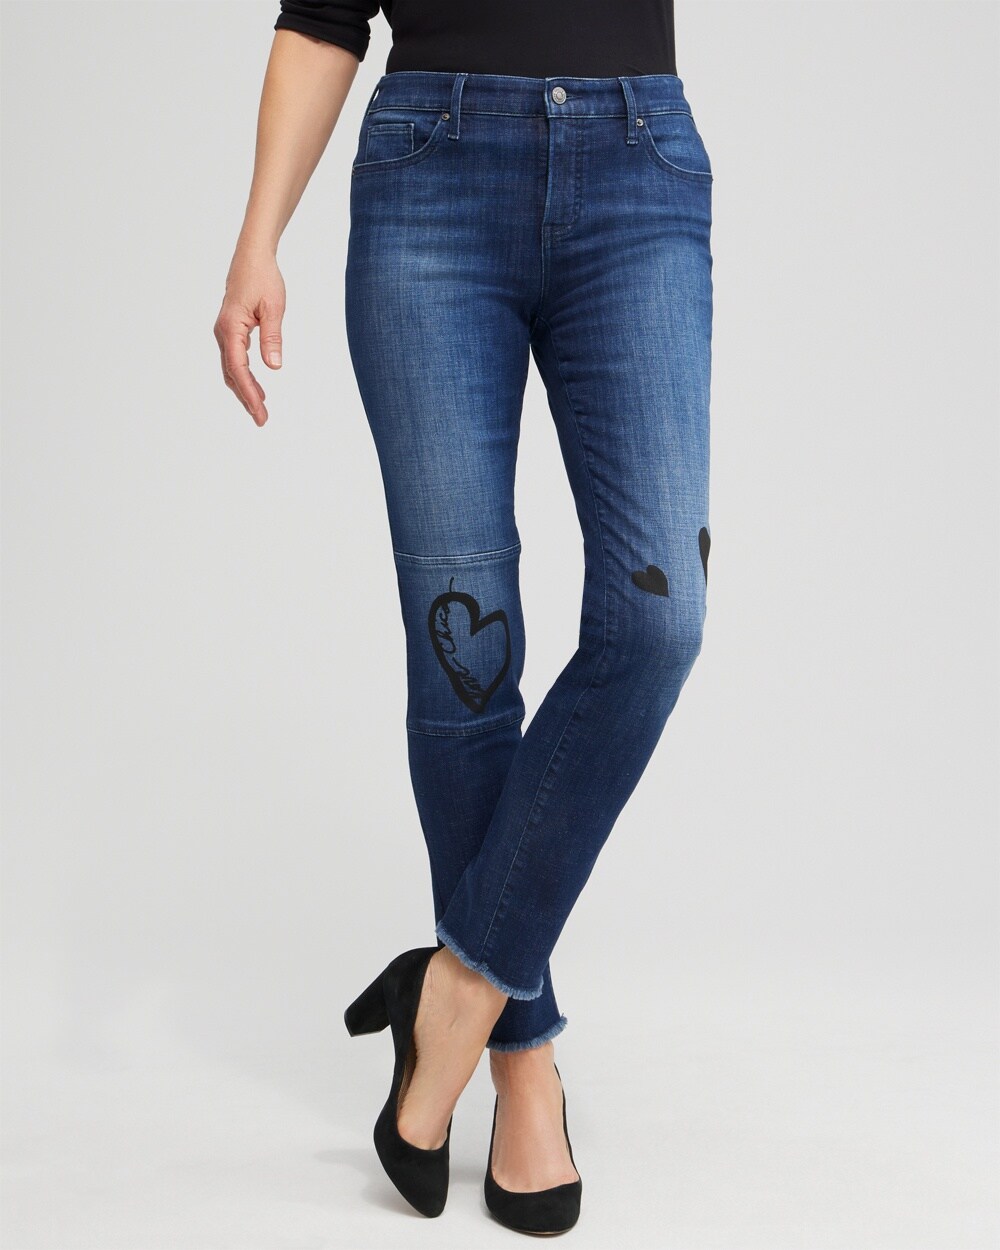 Girlfriend Heart Print Ankle Jeans - Chico's